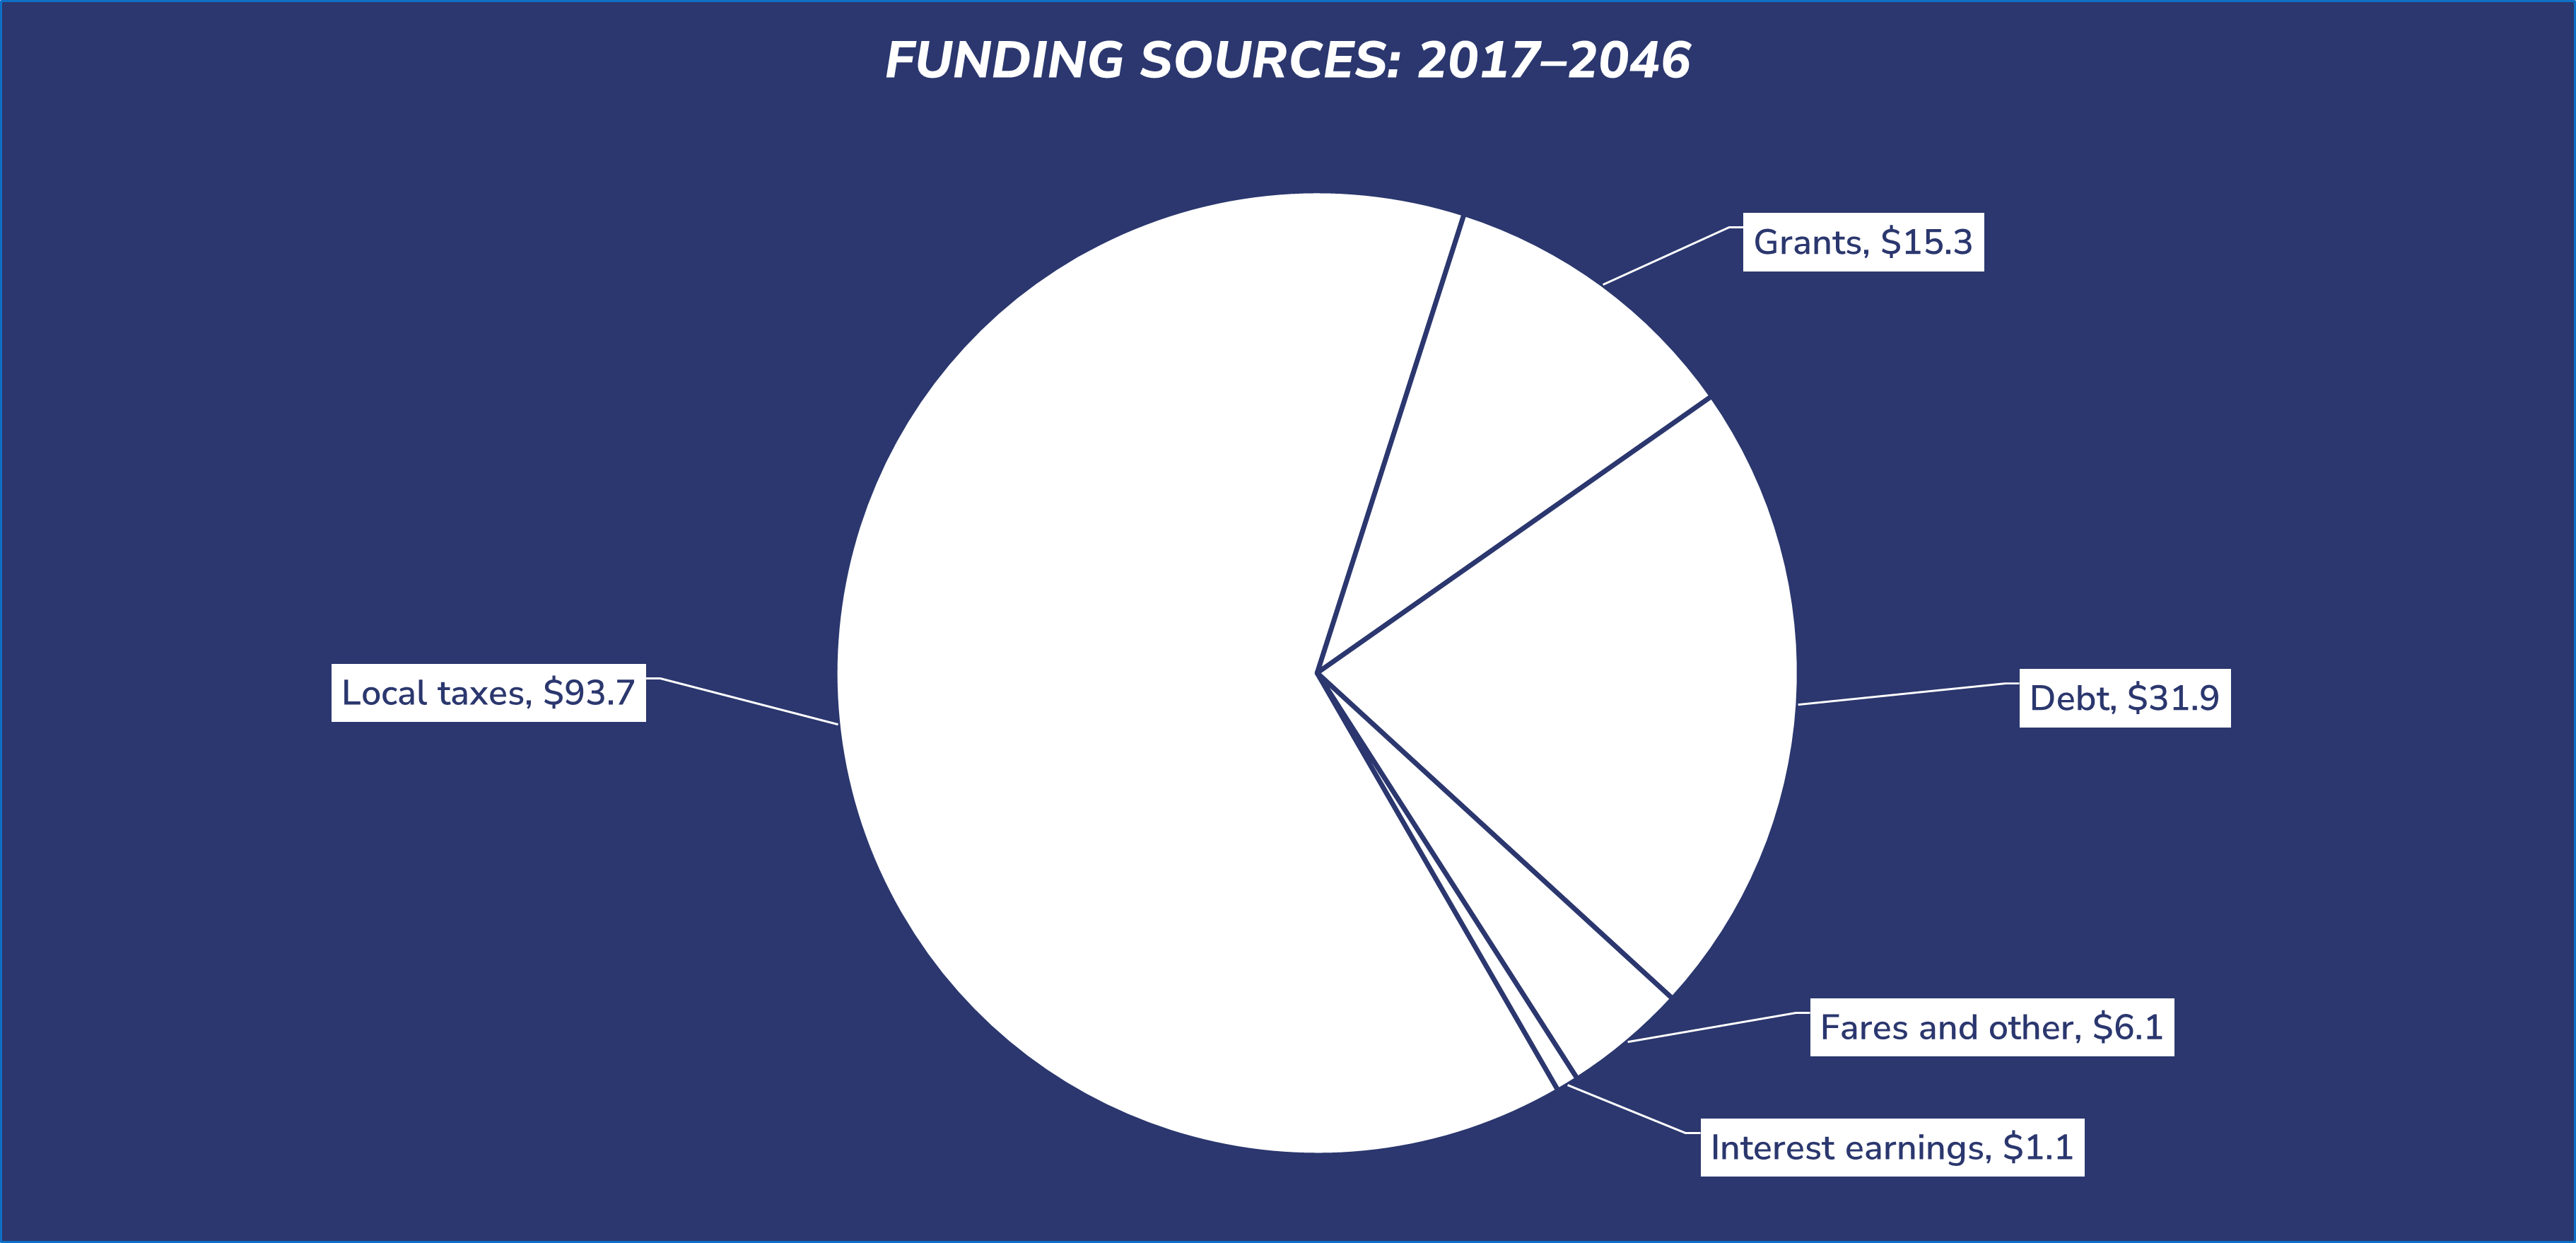 Pie chart depicting Sound Transit funding sources. In descending order, the funding sources are: local taxes $93.7 billion; debt $31.9 billion; grants $15.3 billion; fares and other $6.1 billion; interest earnings $1.1 billion.